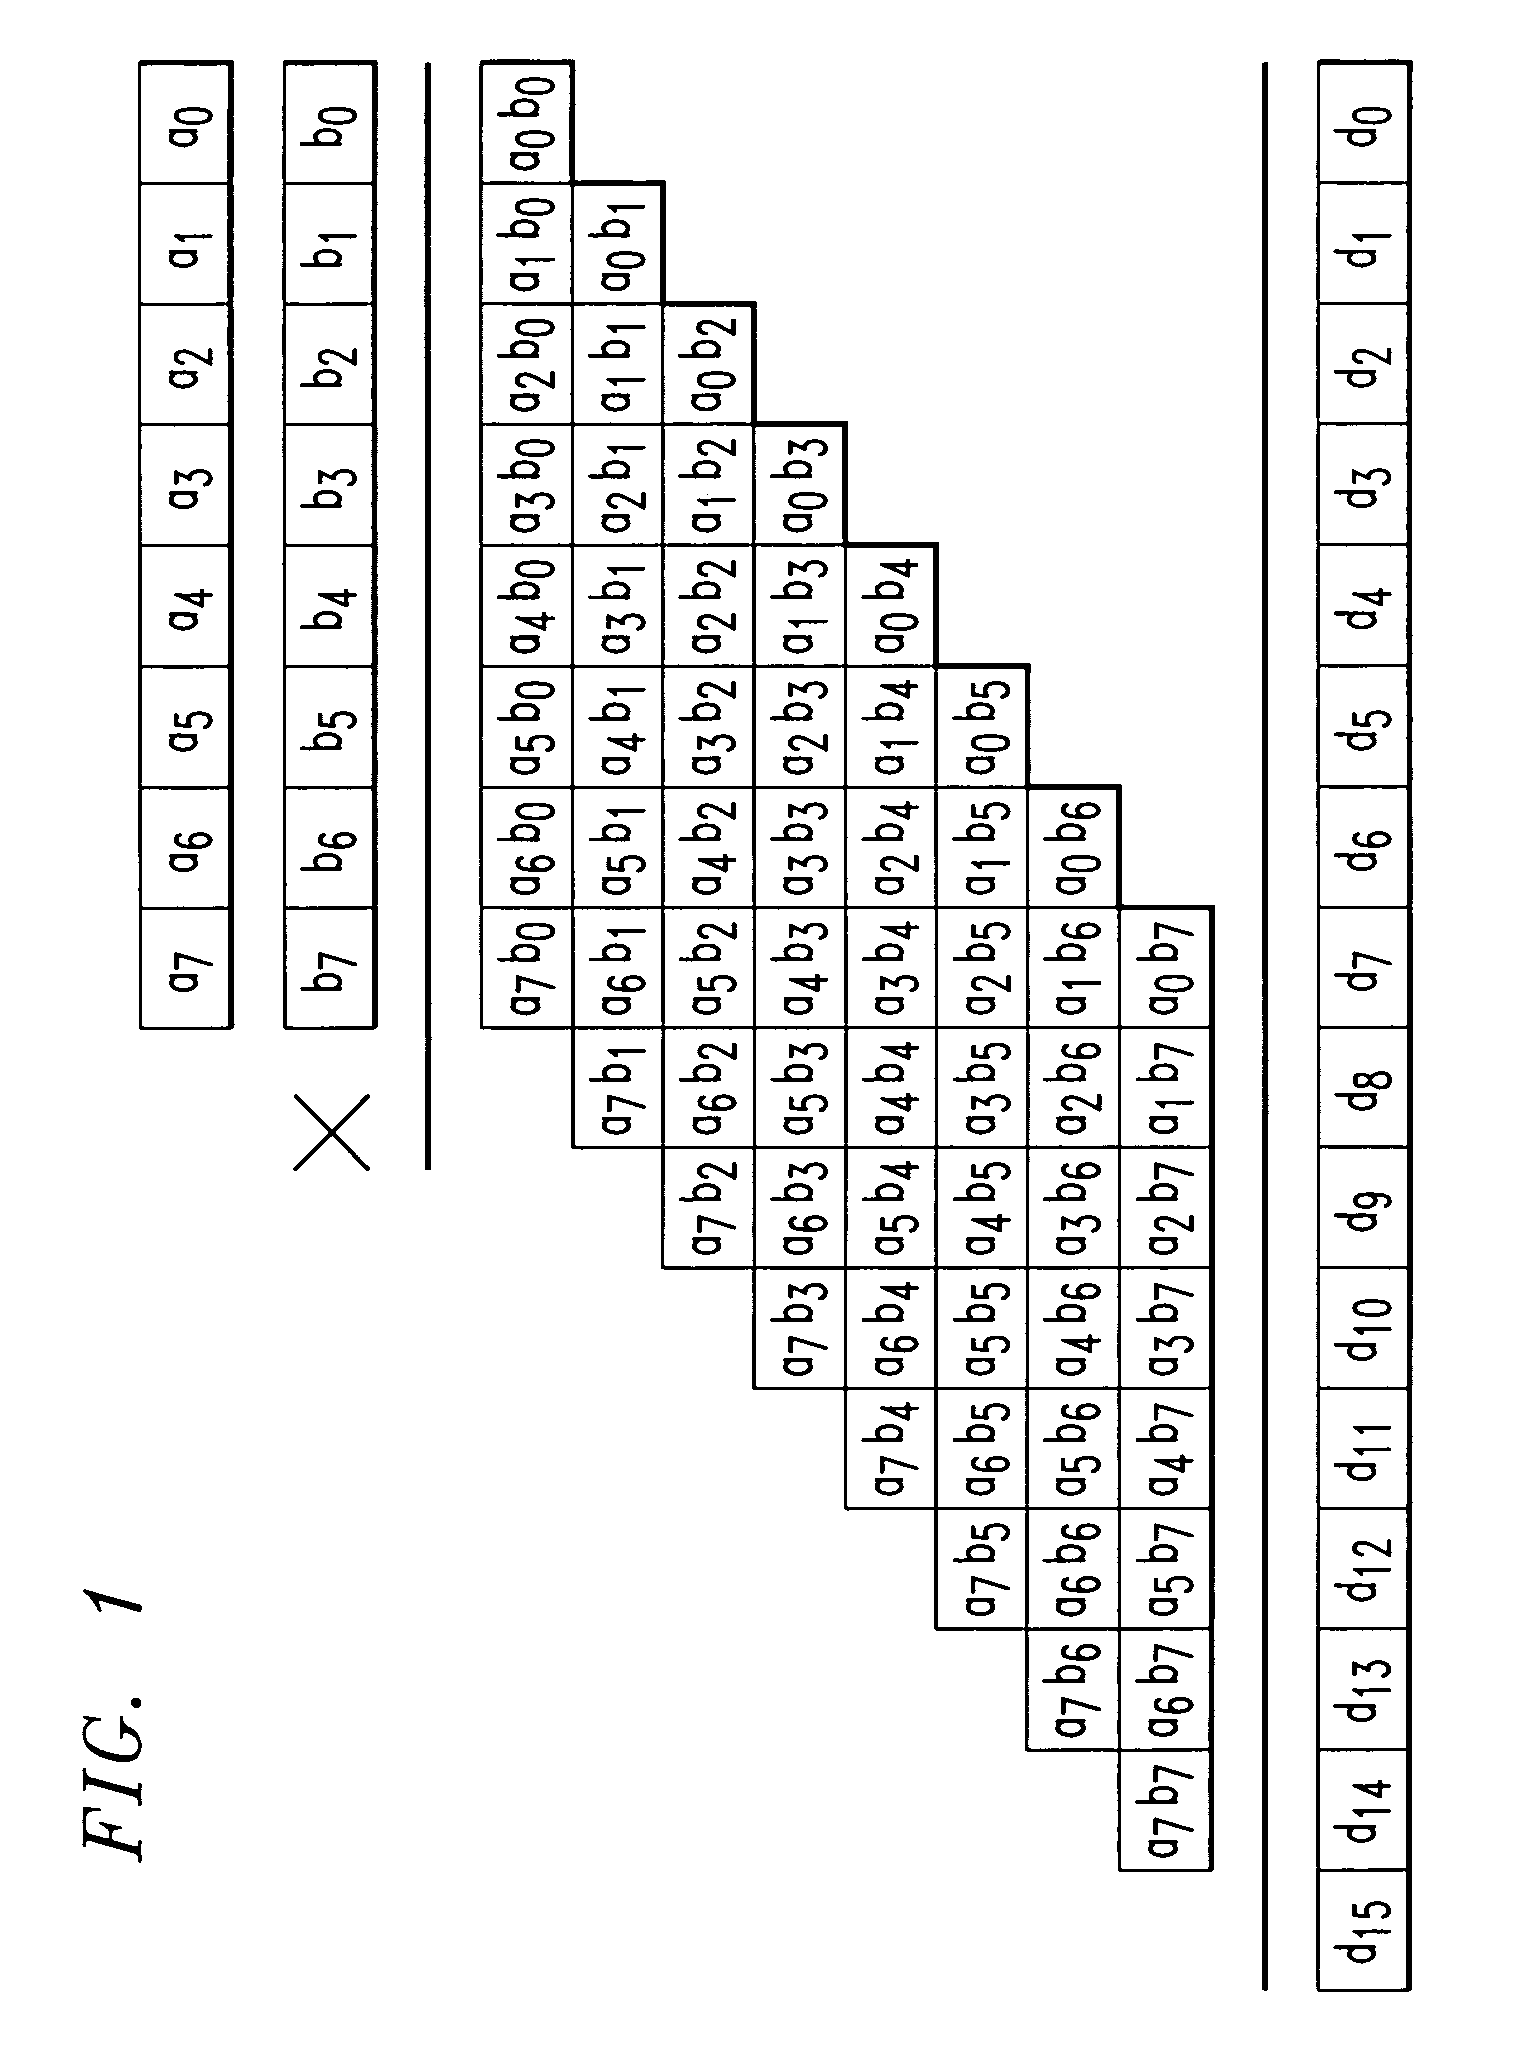 Multiplier and cipher circuit